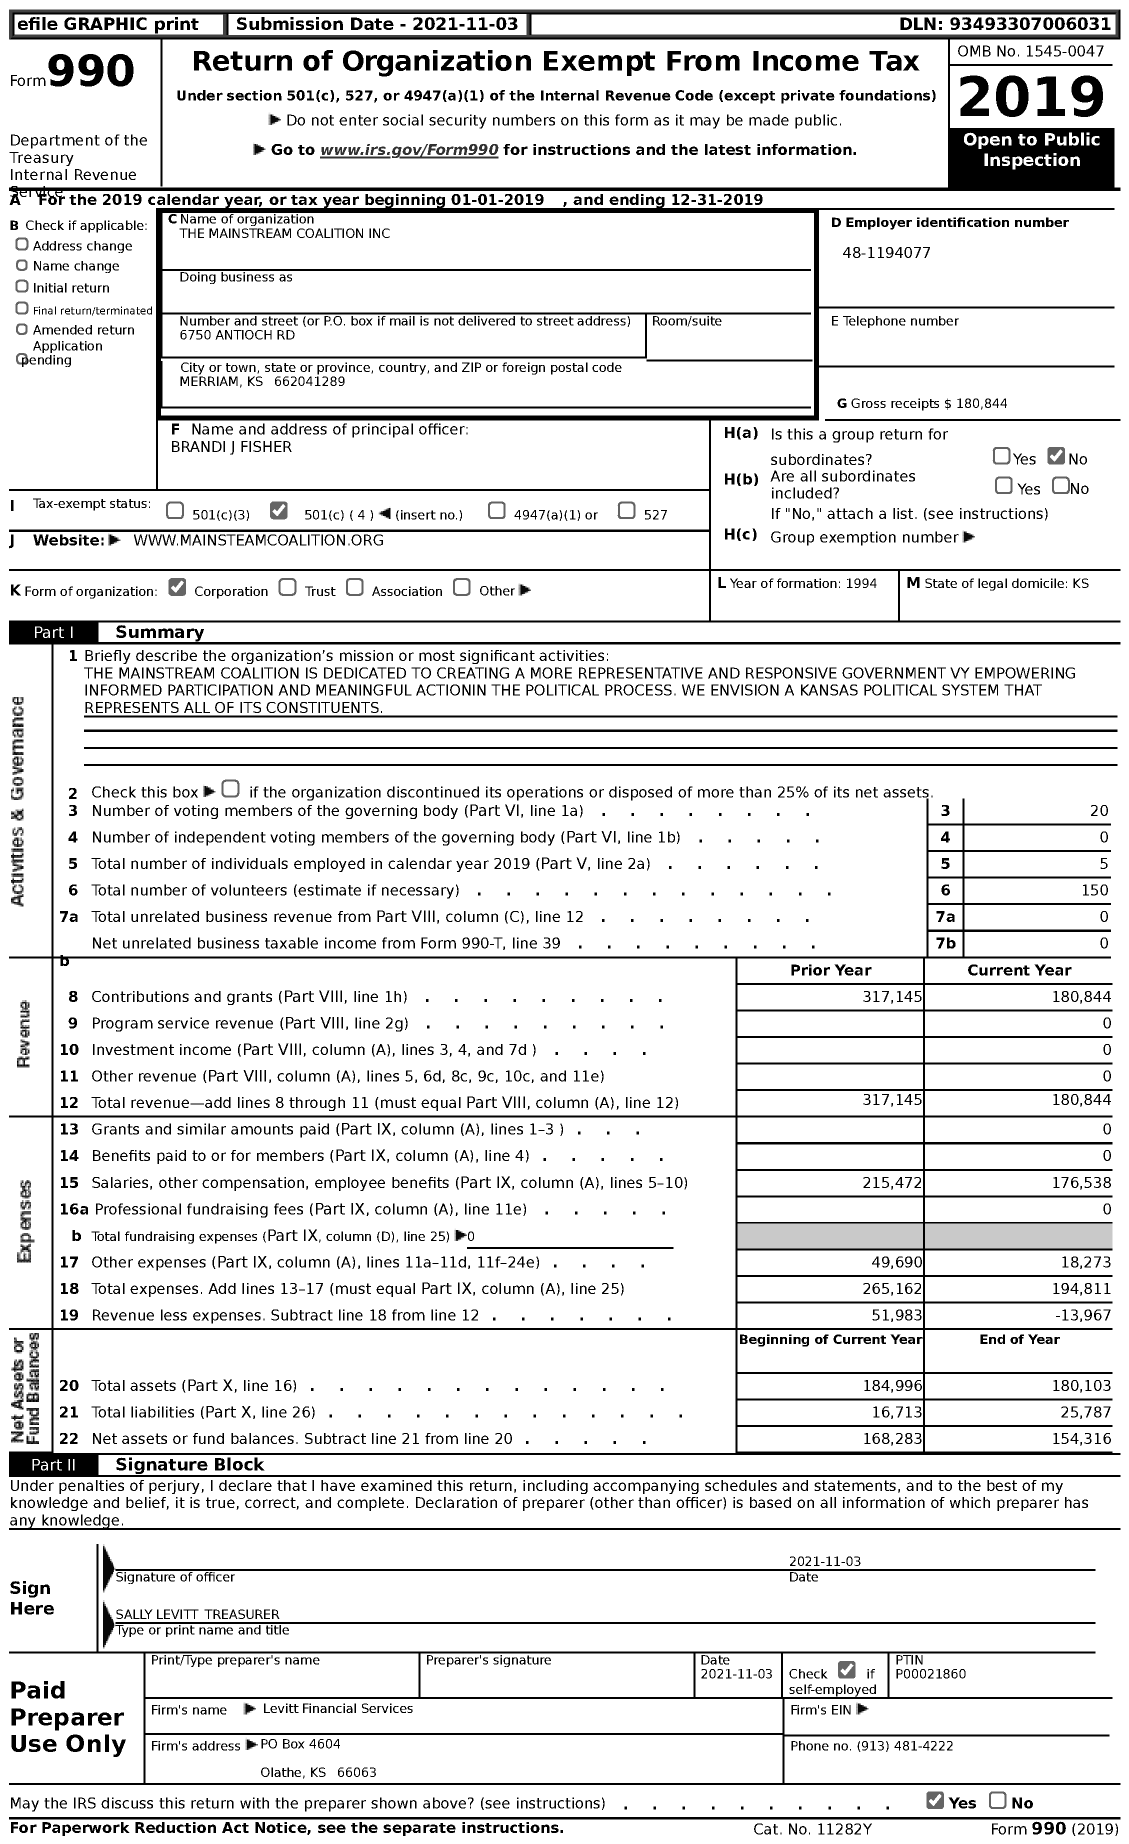 Image of first page of 2019 Form 990 for Mainstream Coalition